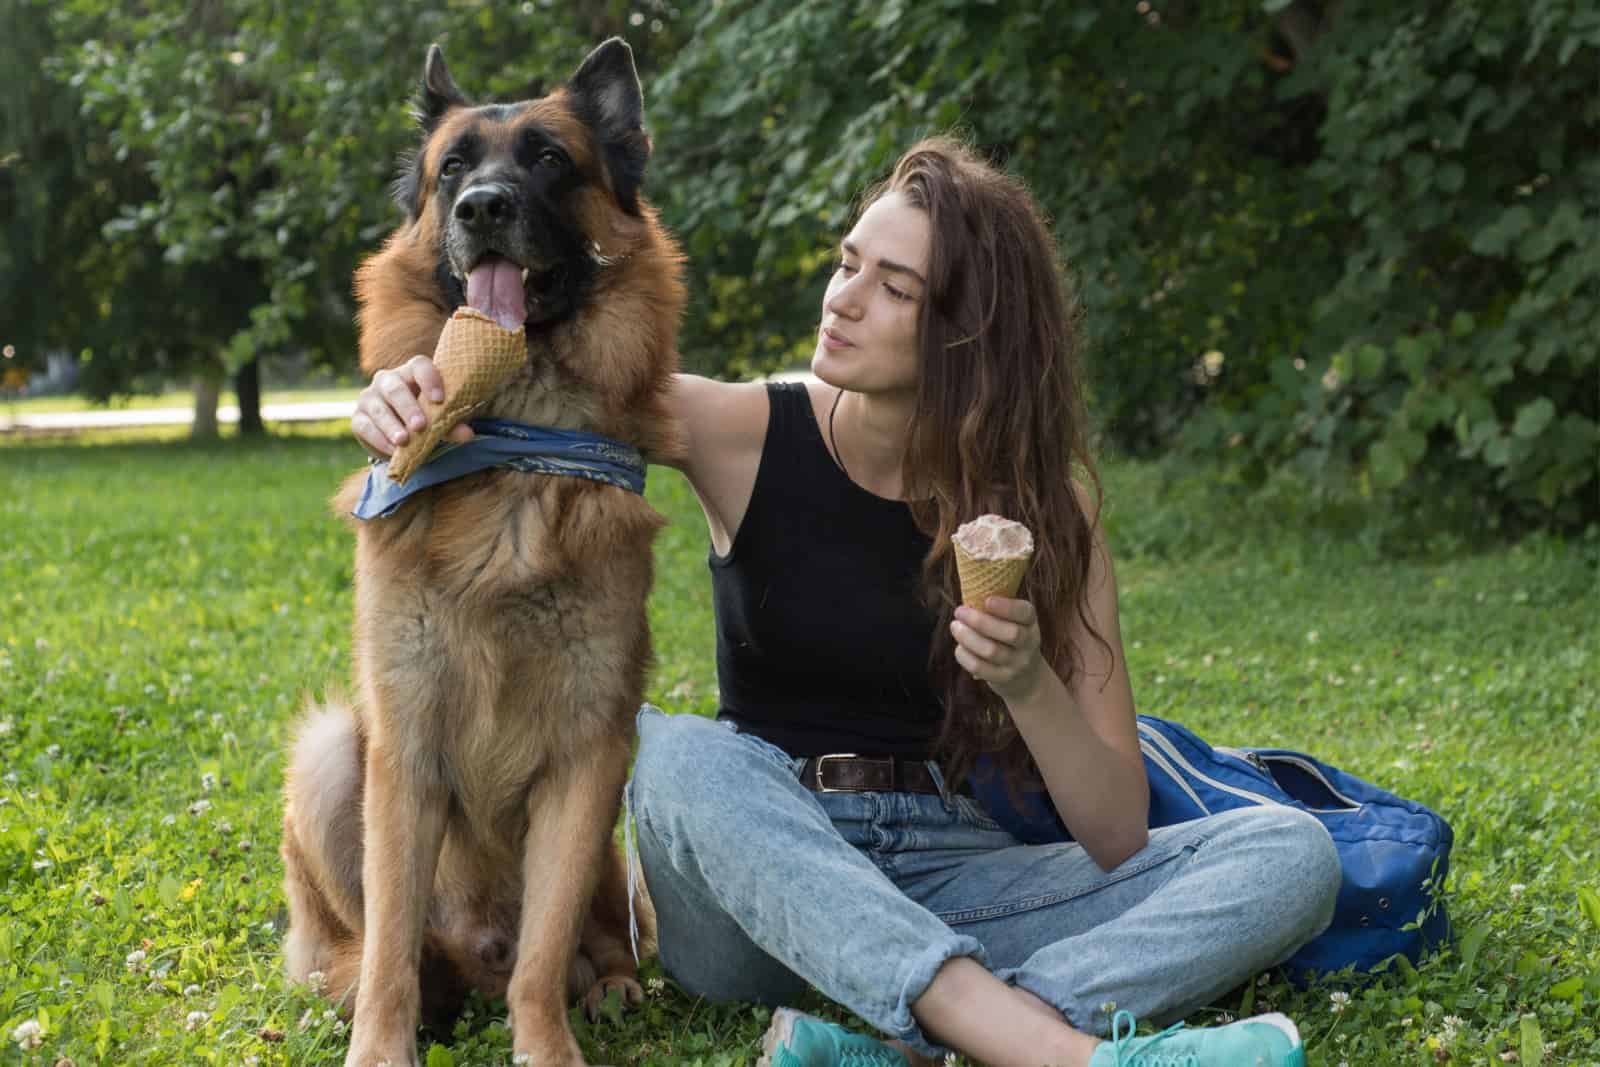 Young woman is feeding the dog an ice-cream, in the park, on a hot summer day.